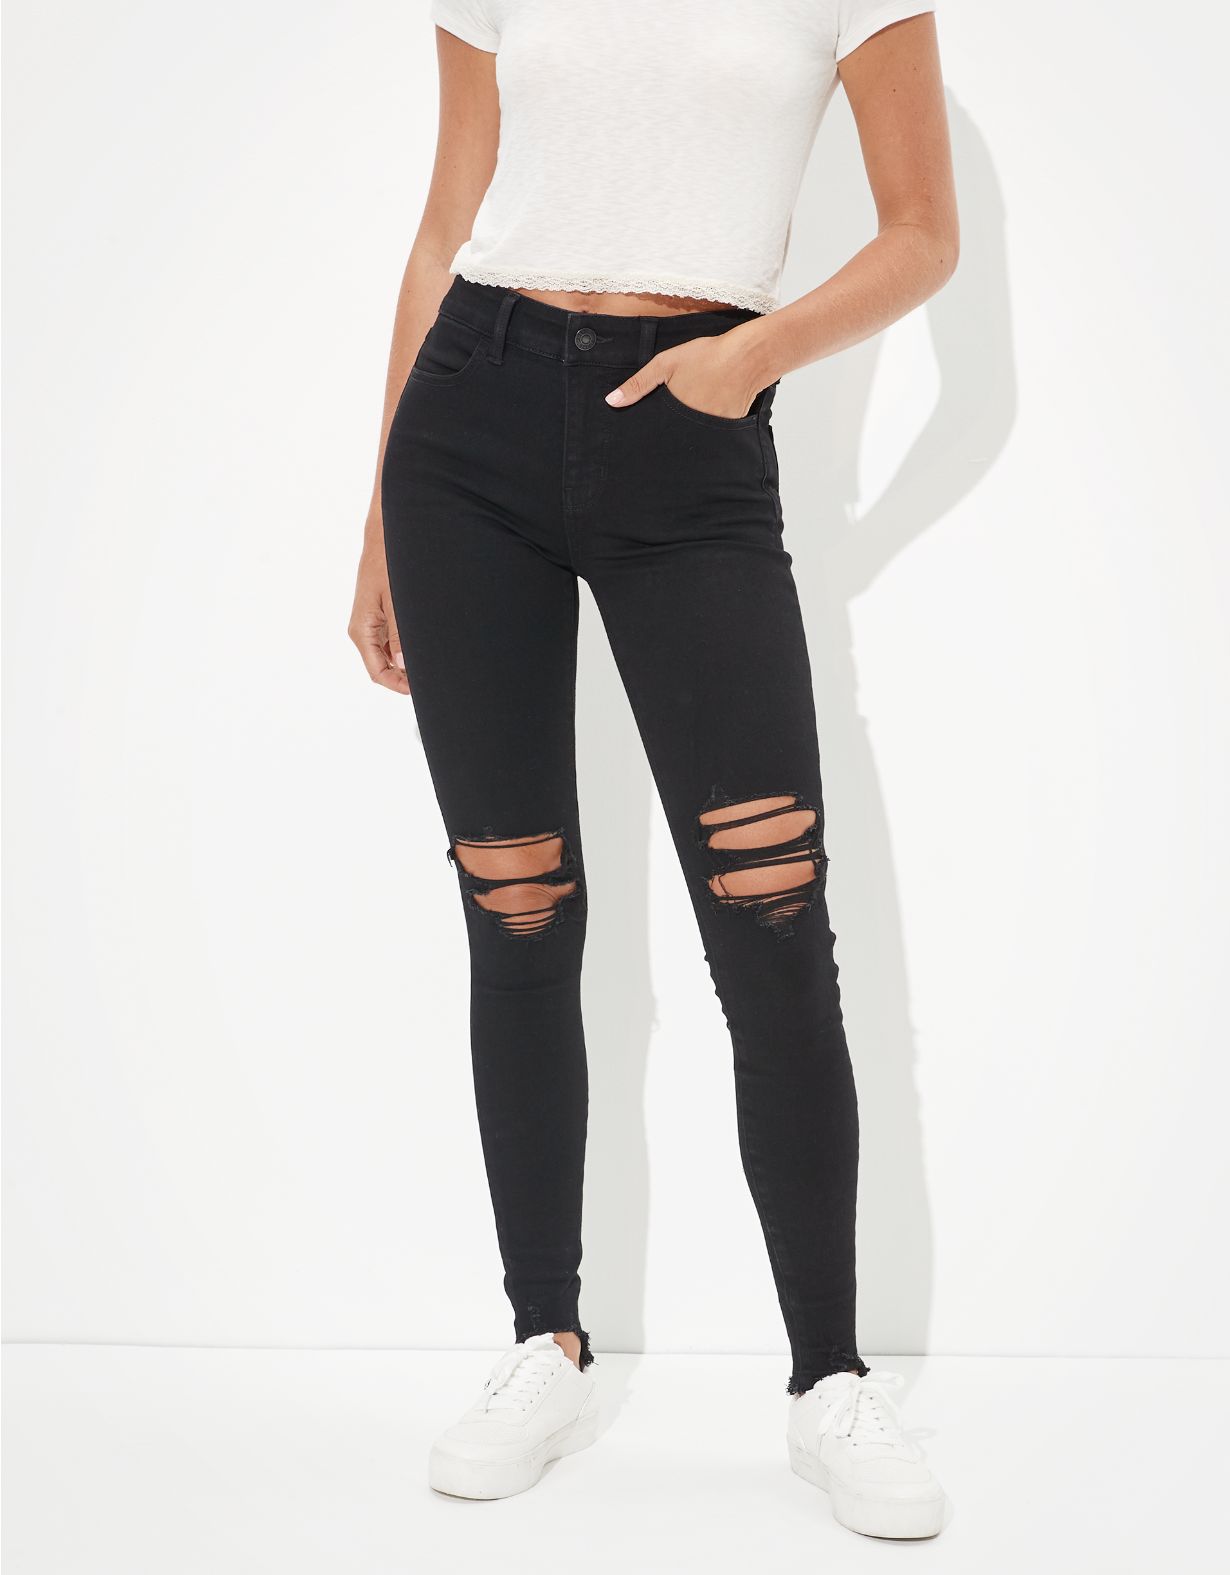 AE Dream Ripped High-Waisted Jegging